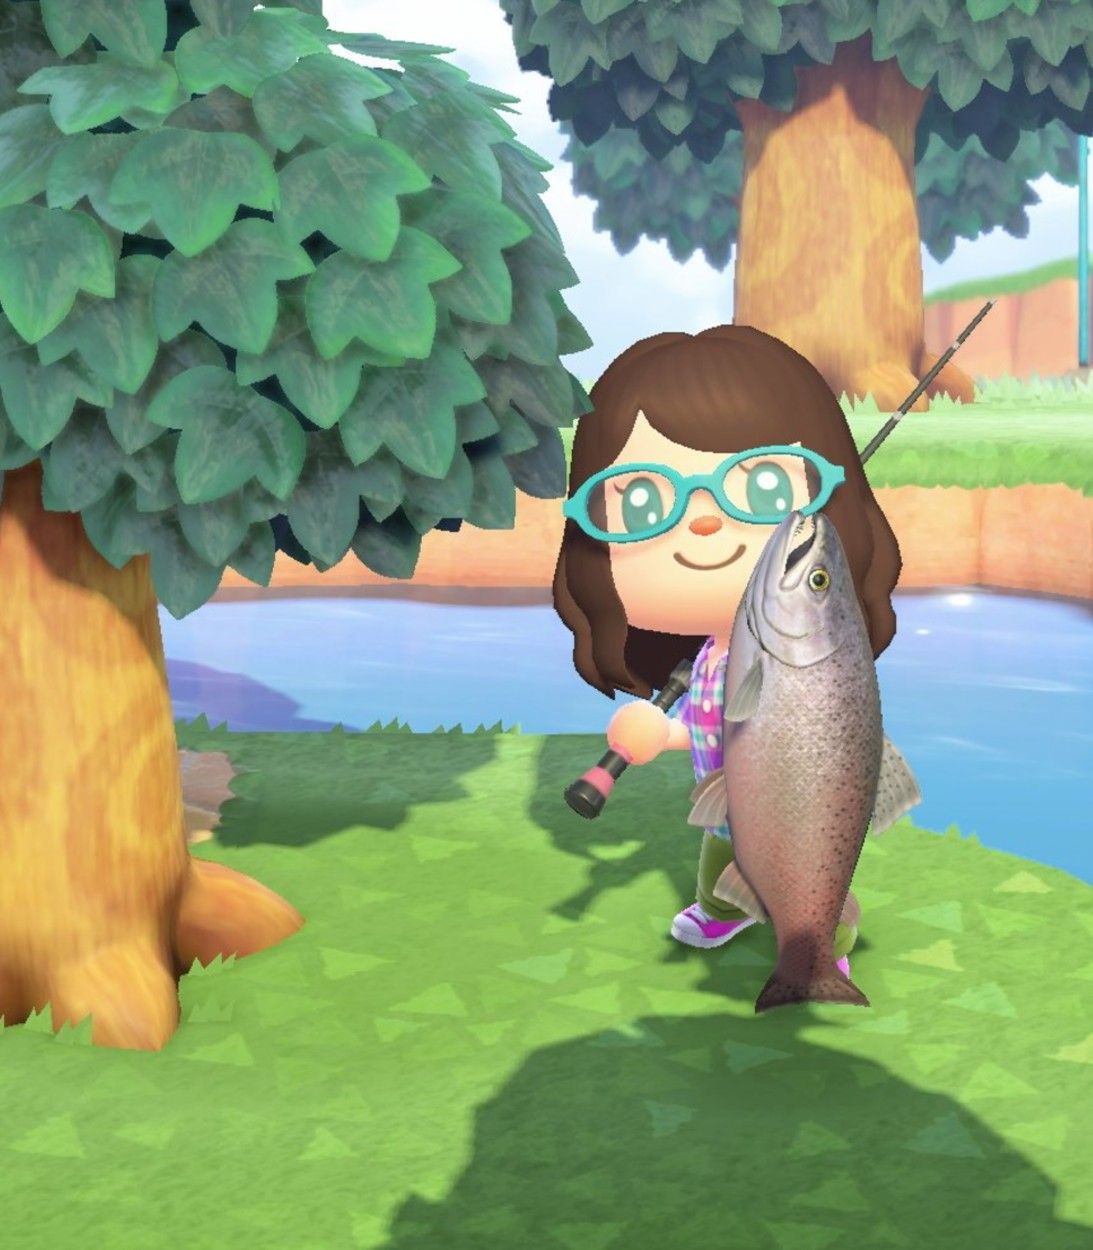 A player catches a King Salmon from the river in Animal Crossing: New Horizons